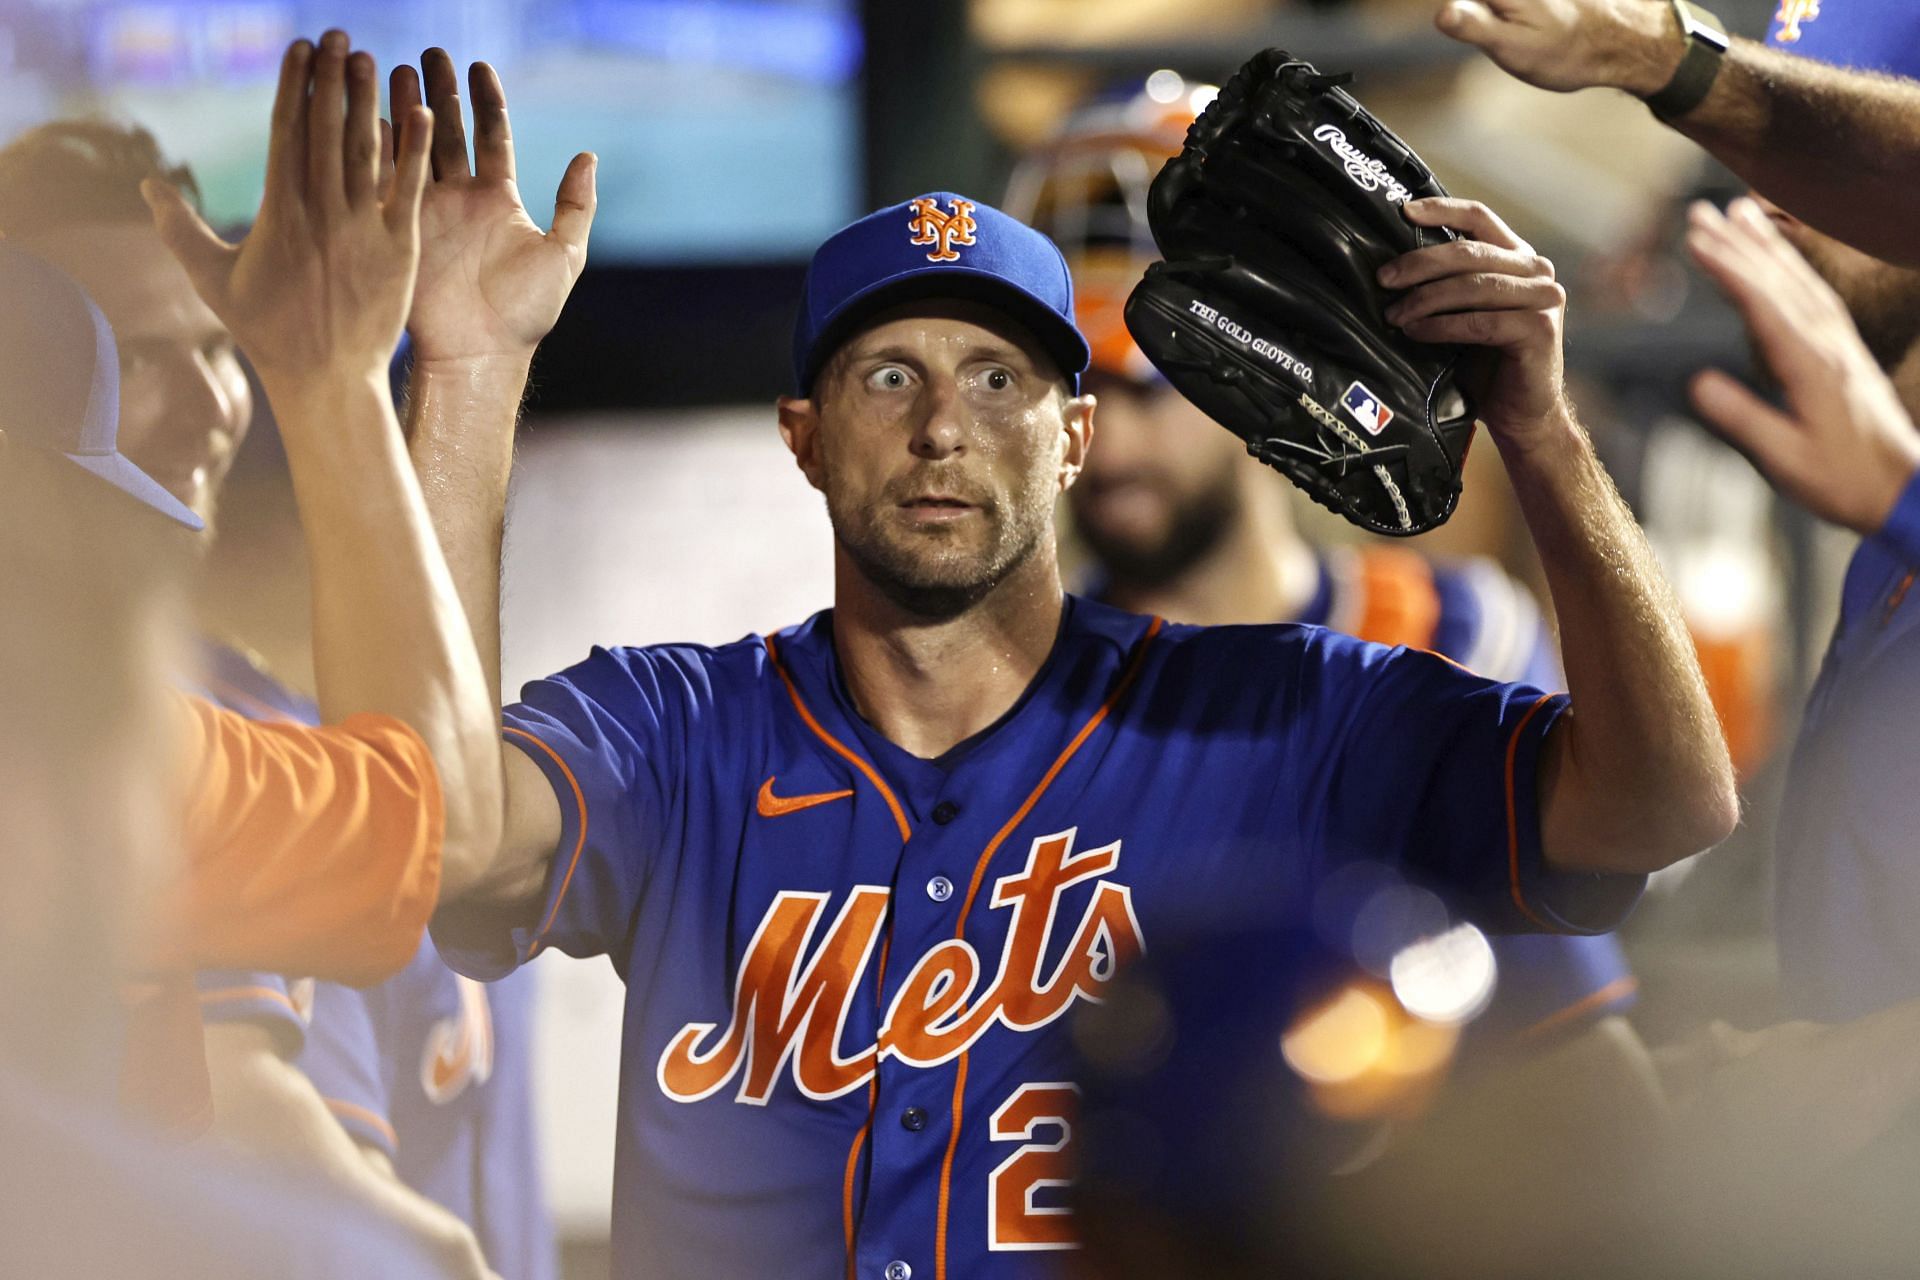 Pitcher Max Scherzer of the New York Mets celebrates during a game against the Atlanta Braves.